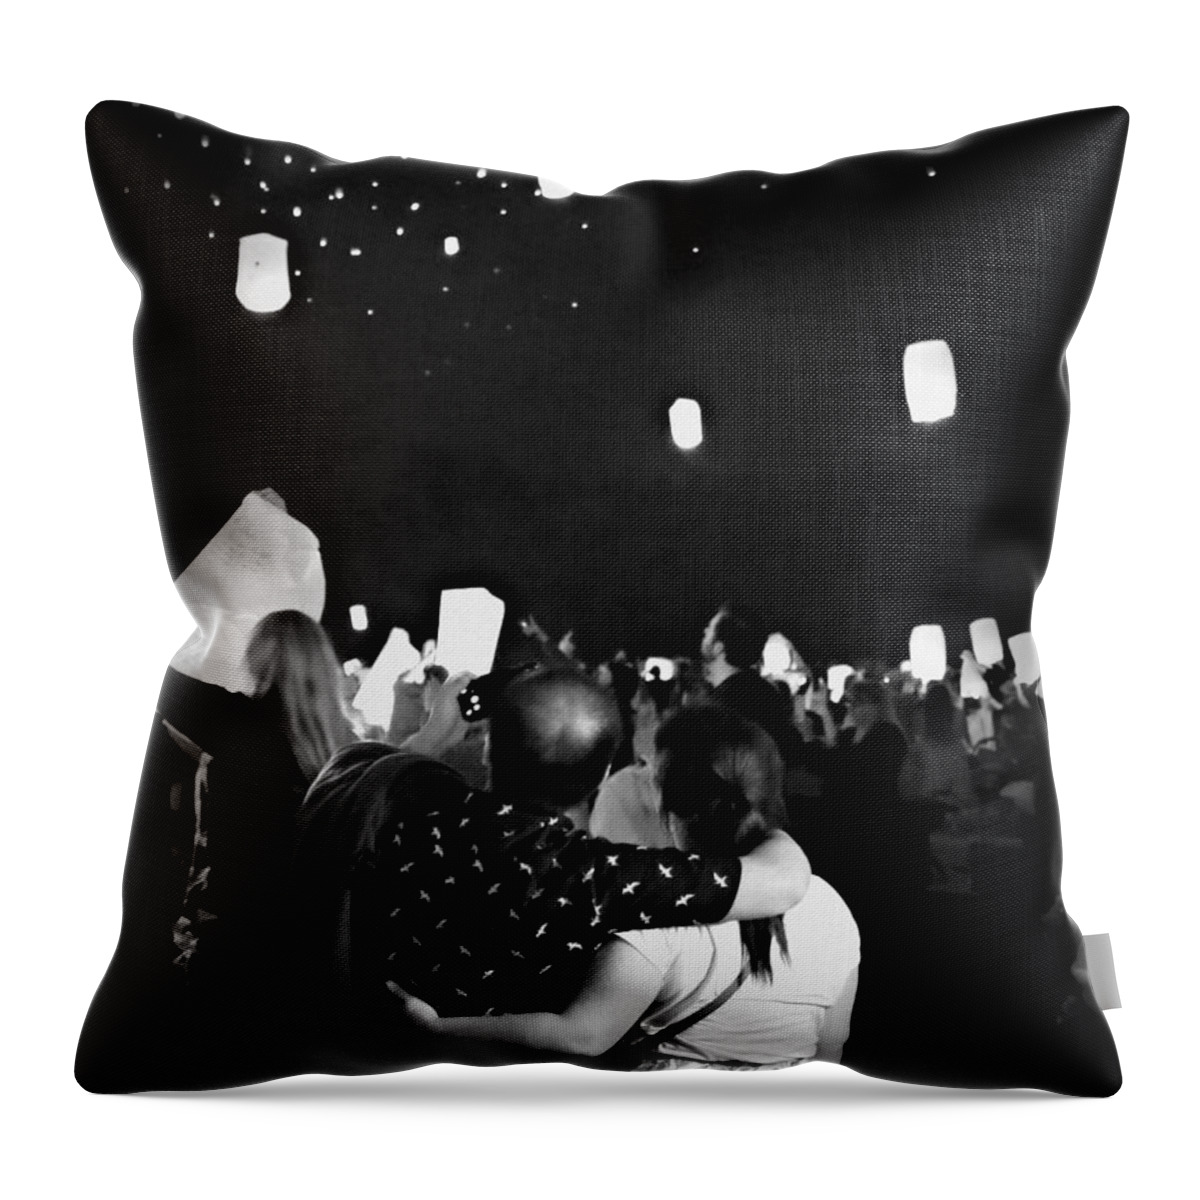 Lantern Throw Pillow featuring the photograph People 1 by Carol Jorgensen